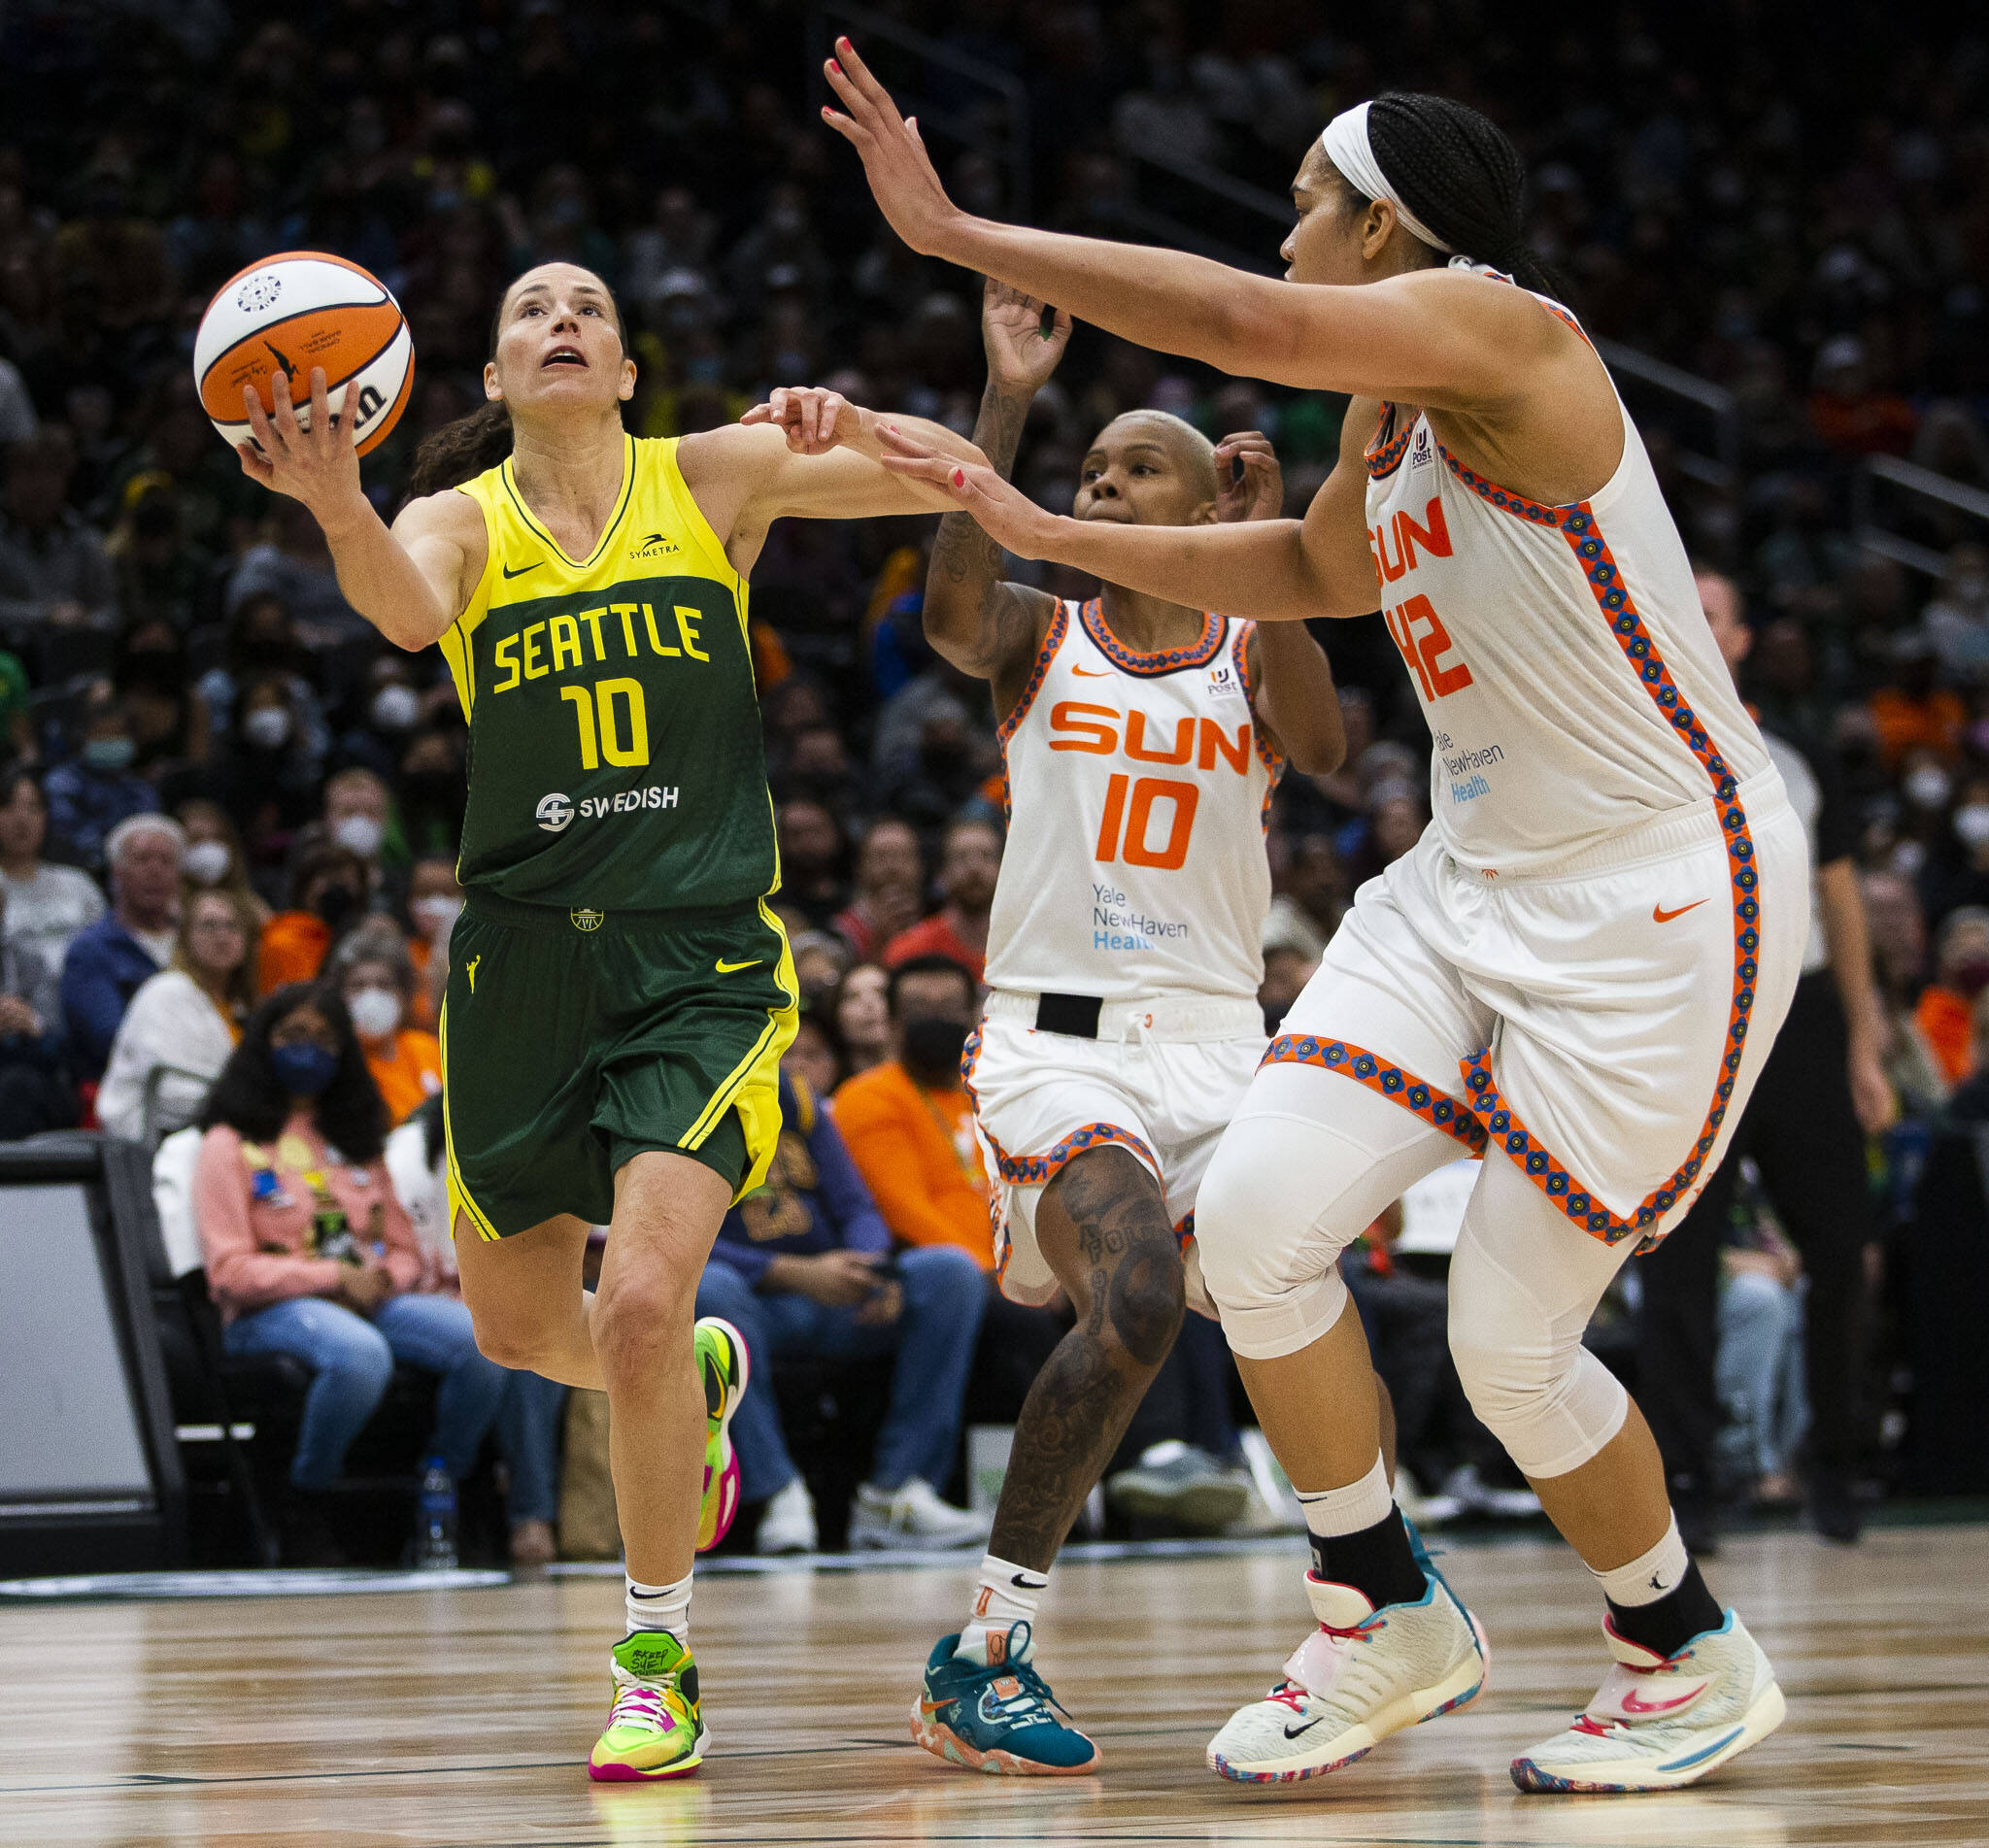 The Storm’s Sue Bird drives to the hoop for a layup during a game against the Sun on June 5, 2022, in Seattle. (Olivia Vanni / The Herald)